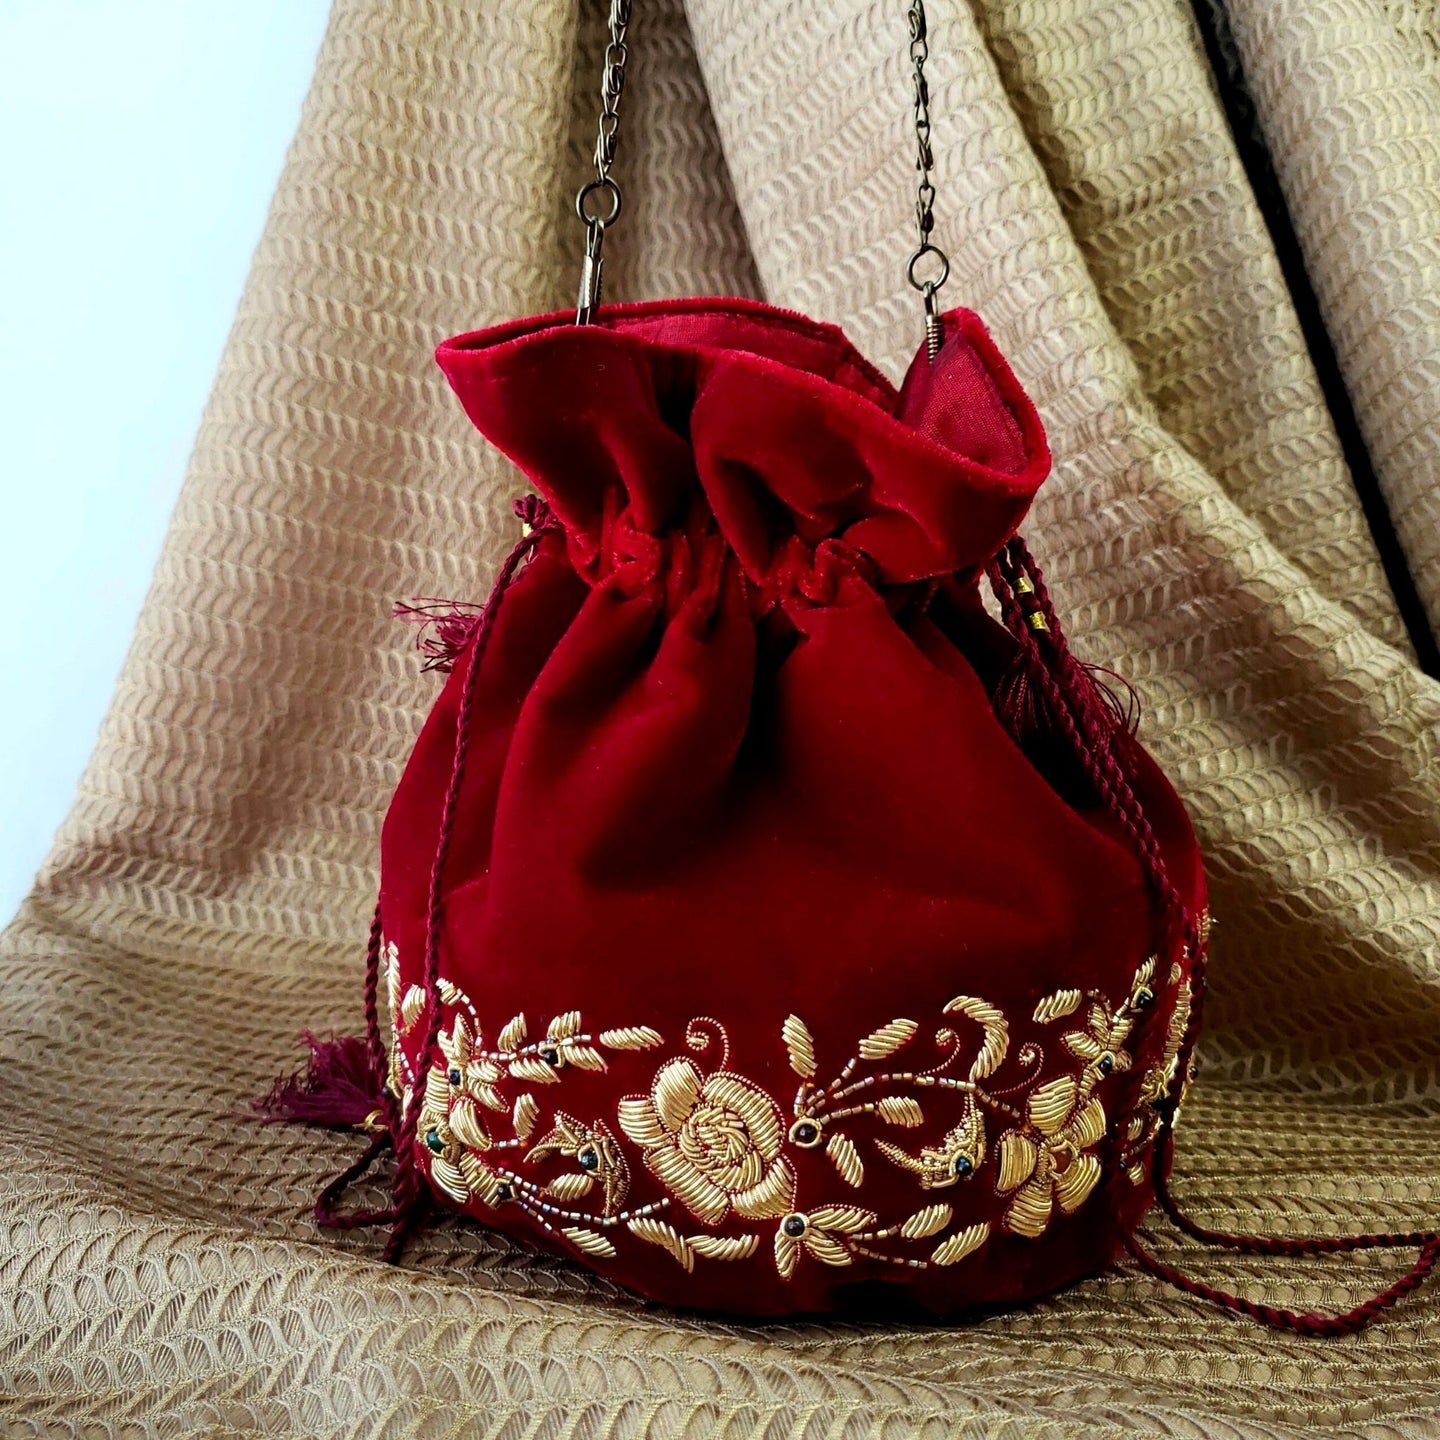 Indian wedding clutch bag in red velvet embroidered with gold flowers, zardozi embroidery. 